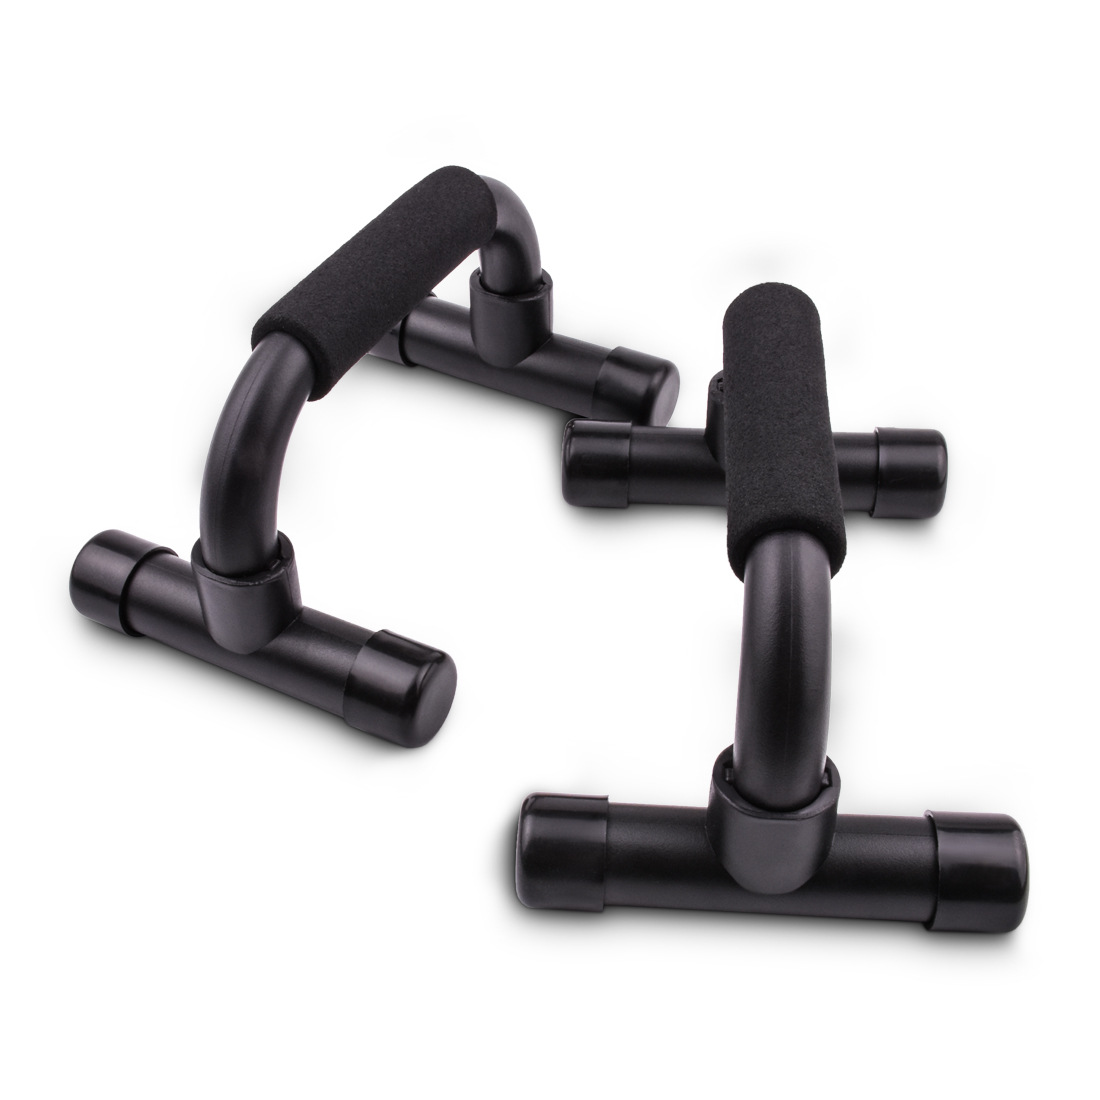 Home Portable Push-Up Bars – Gold Body Health